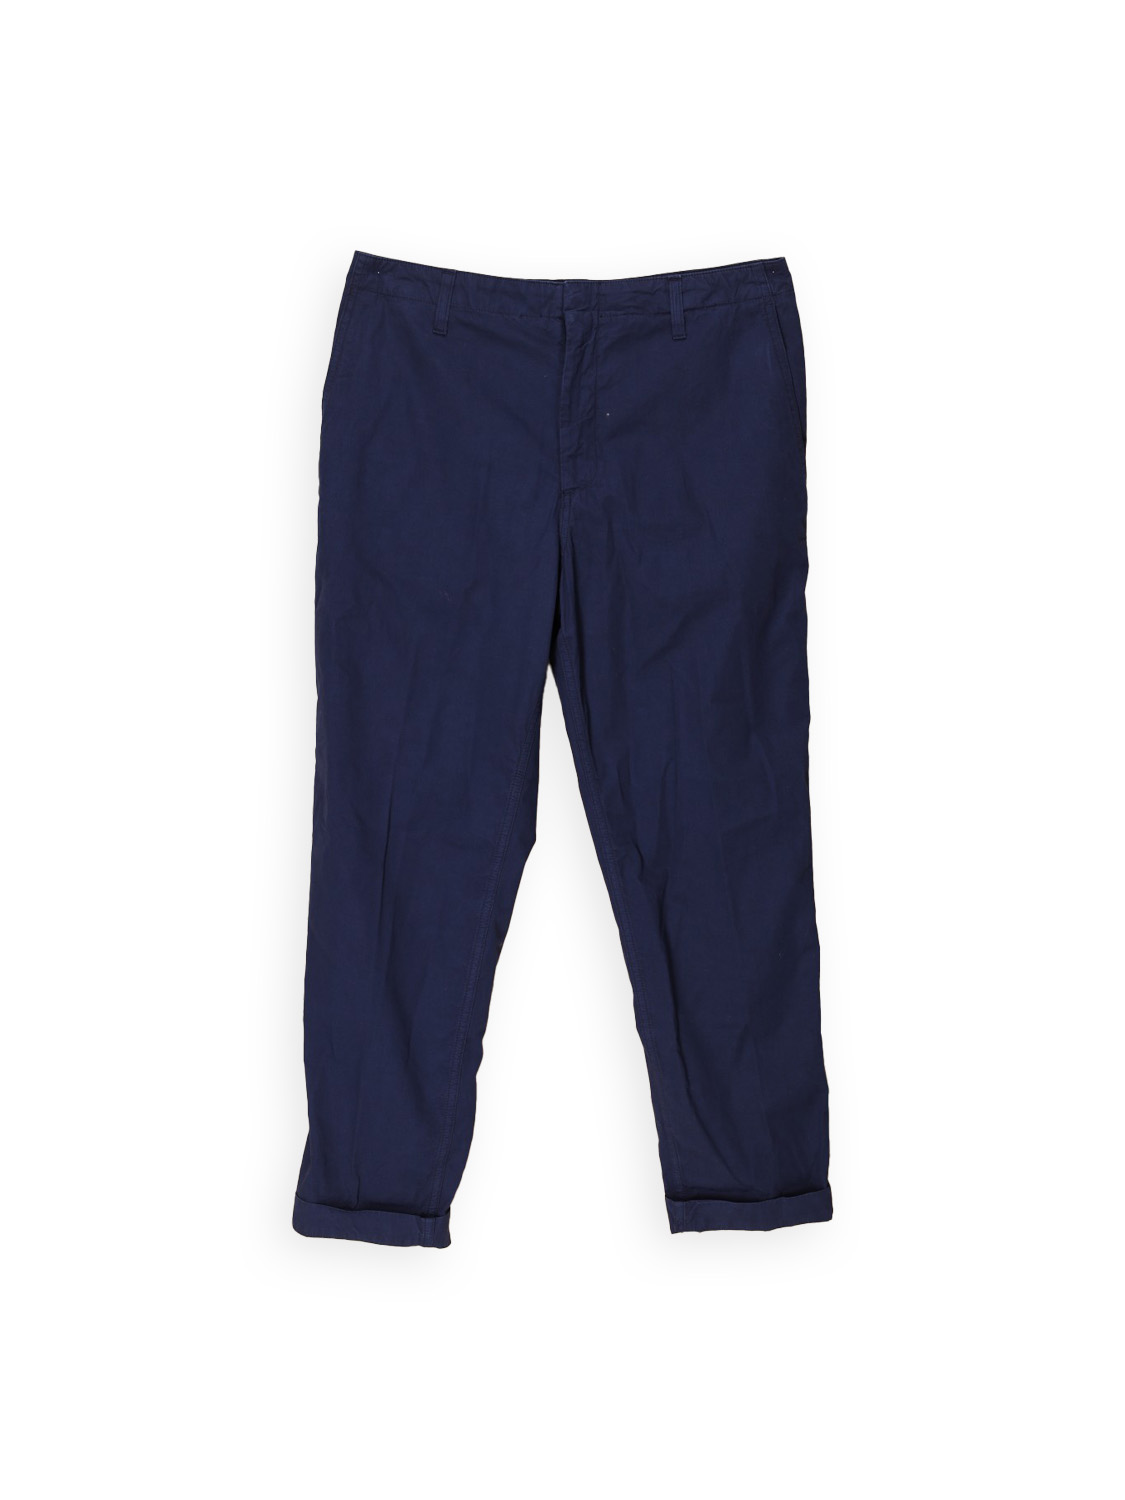 Cotton chino style trousers 